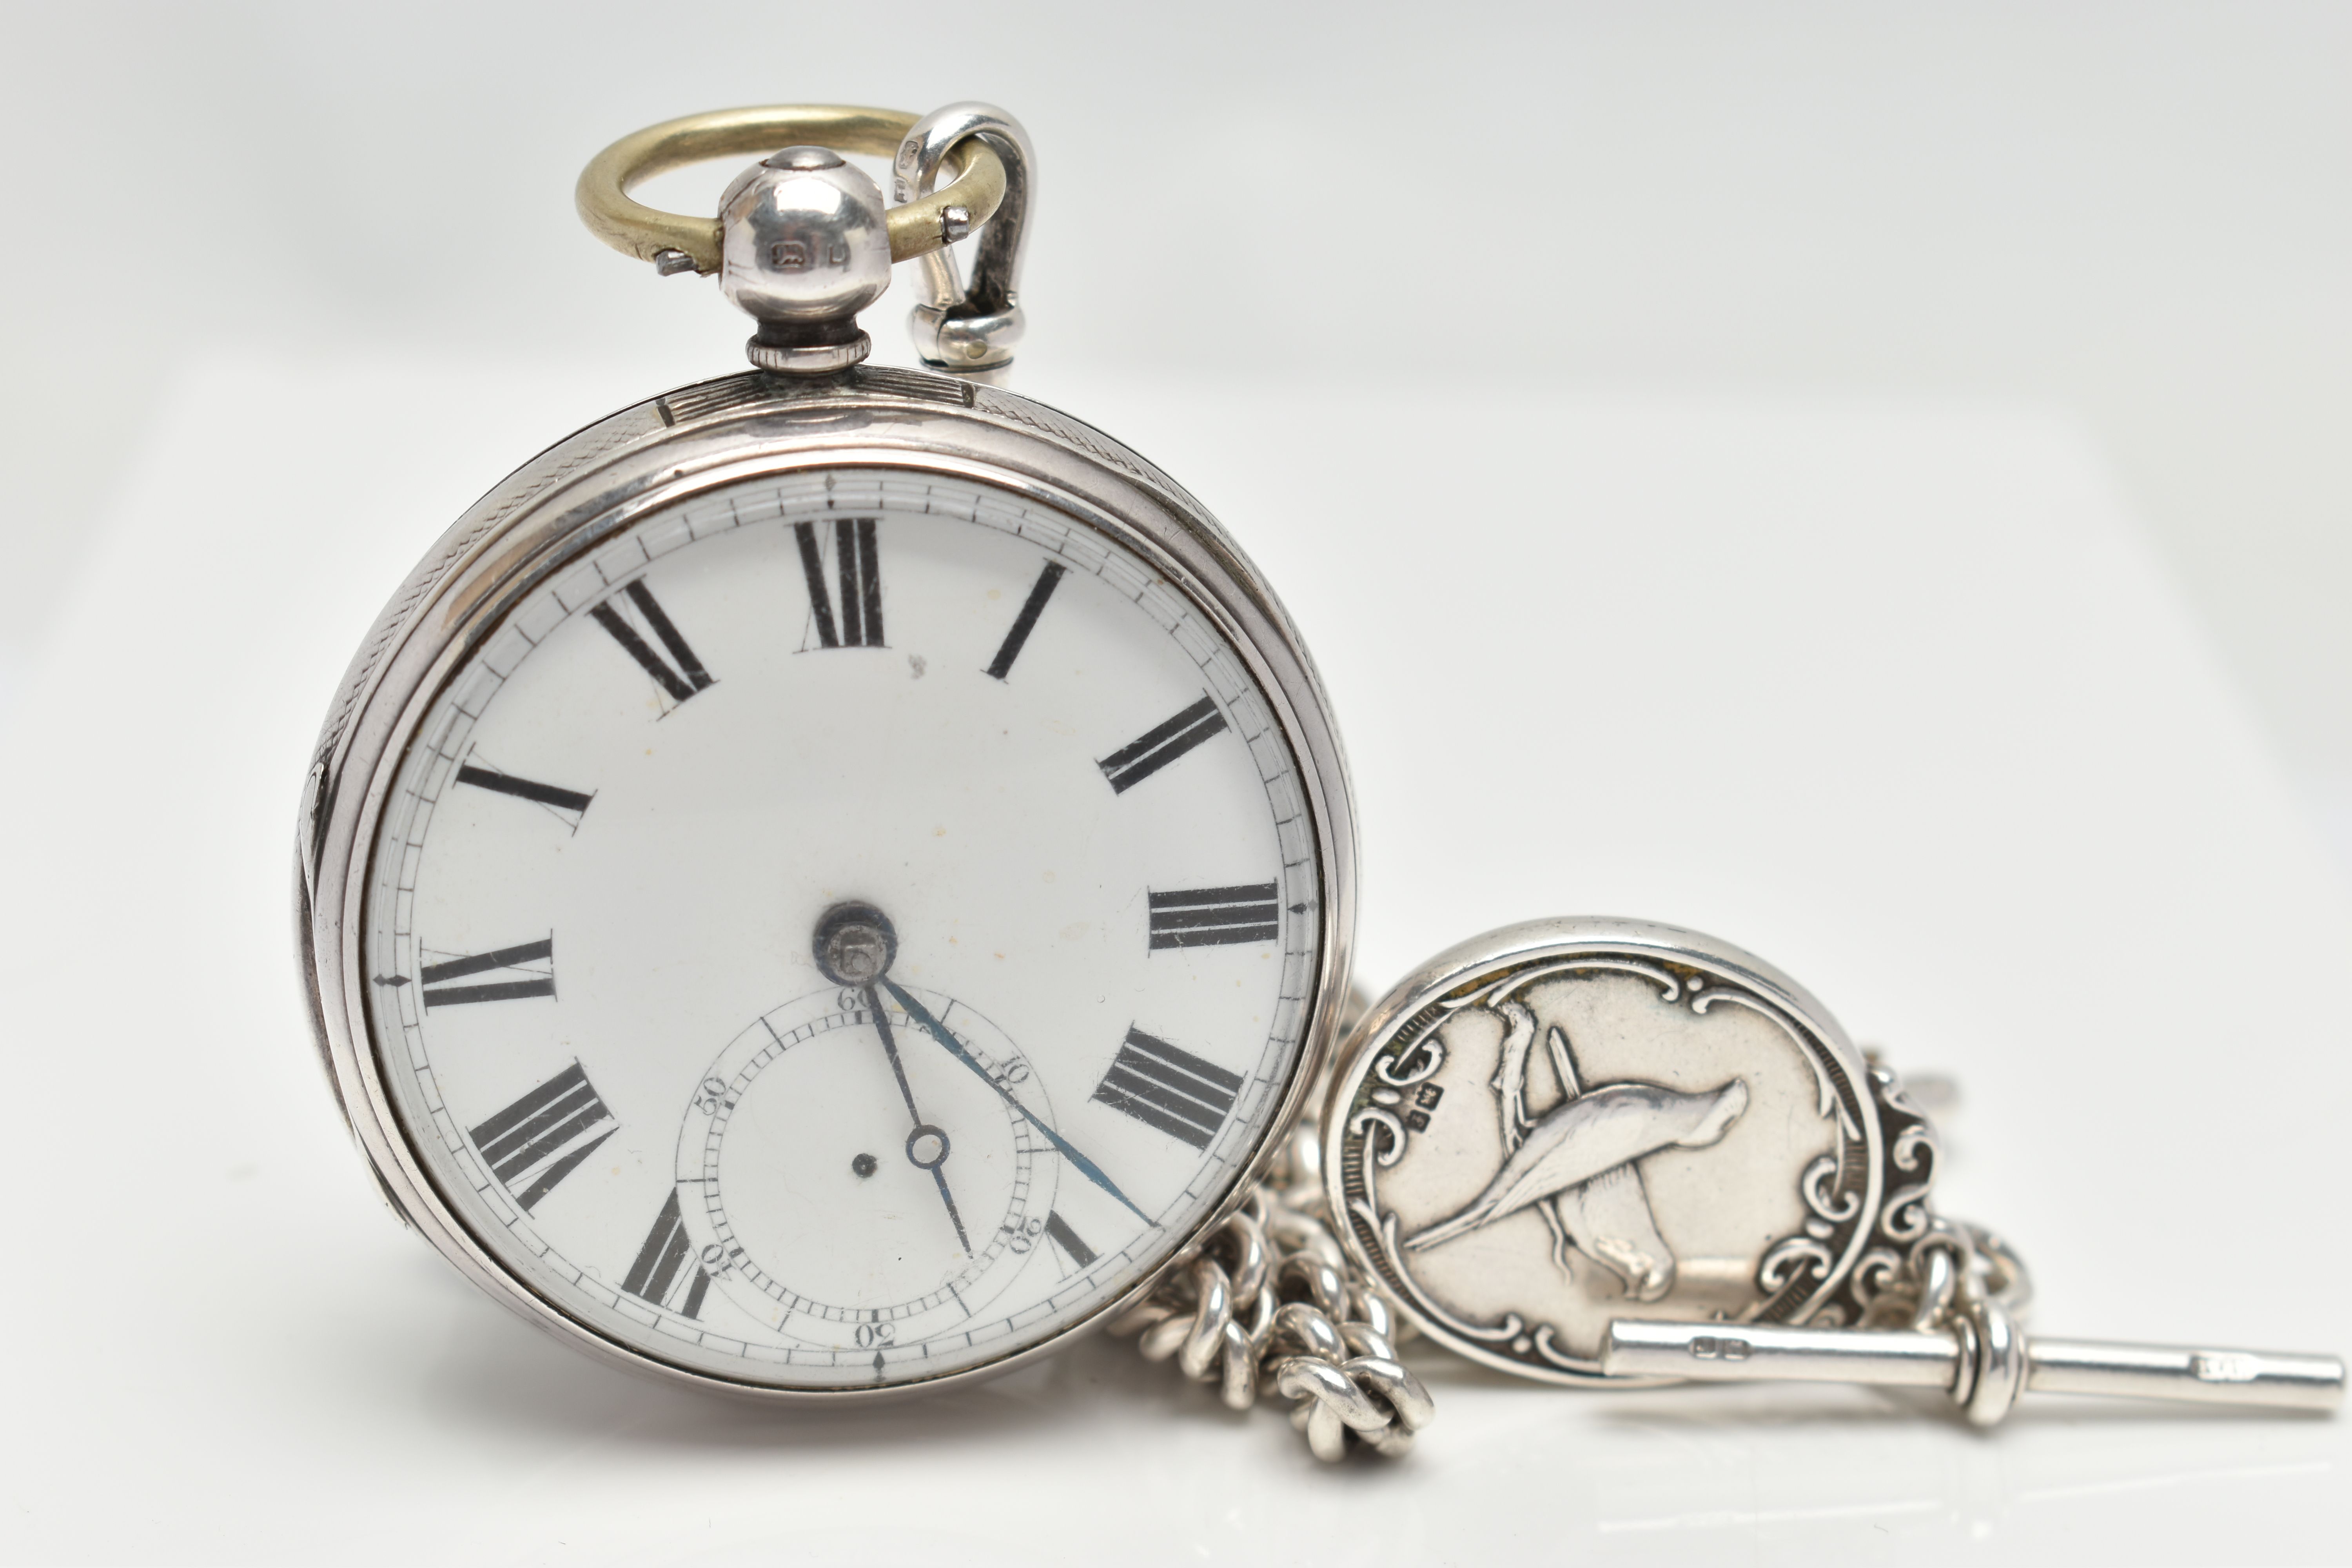 A LATE VICTORIAN SILVER OPEN FACE POCKET WATCH AND AN ALBERT CHAIN, key wound, round white dial,